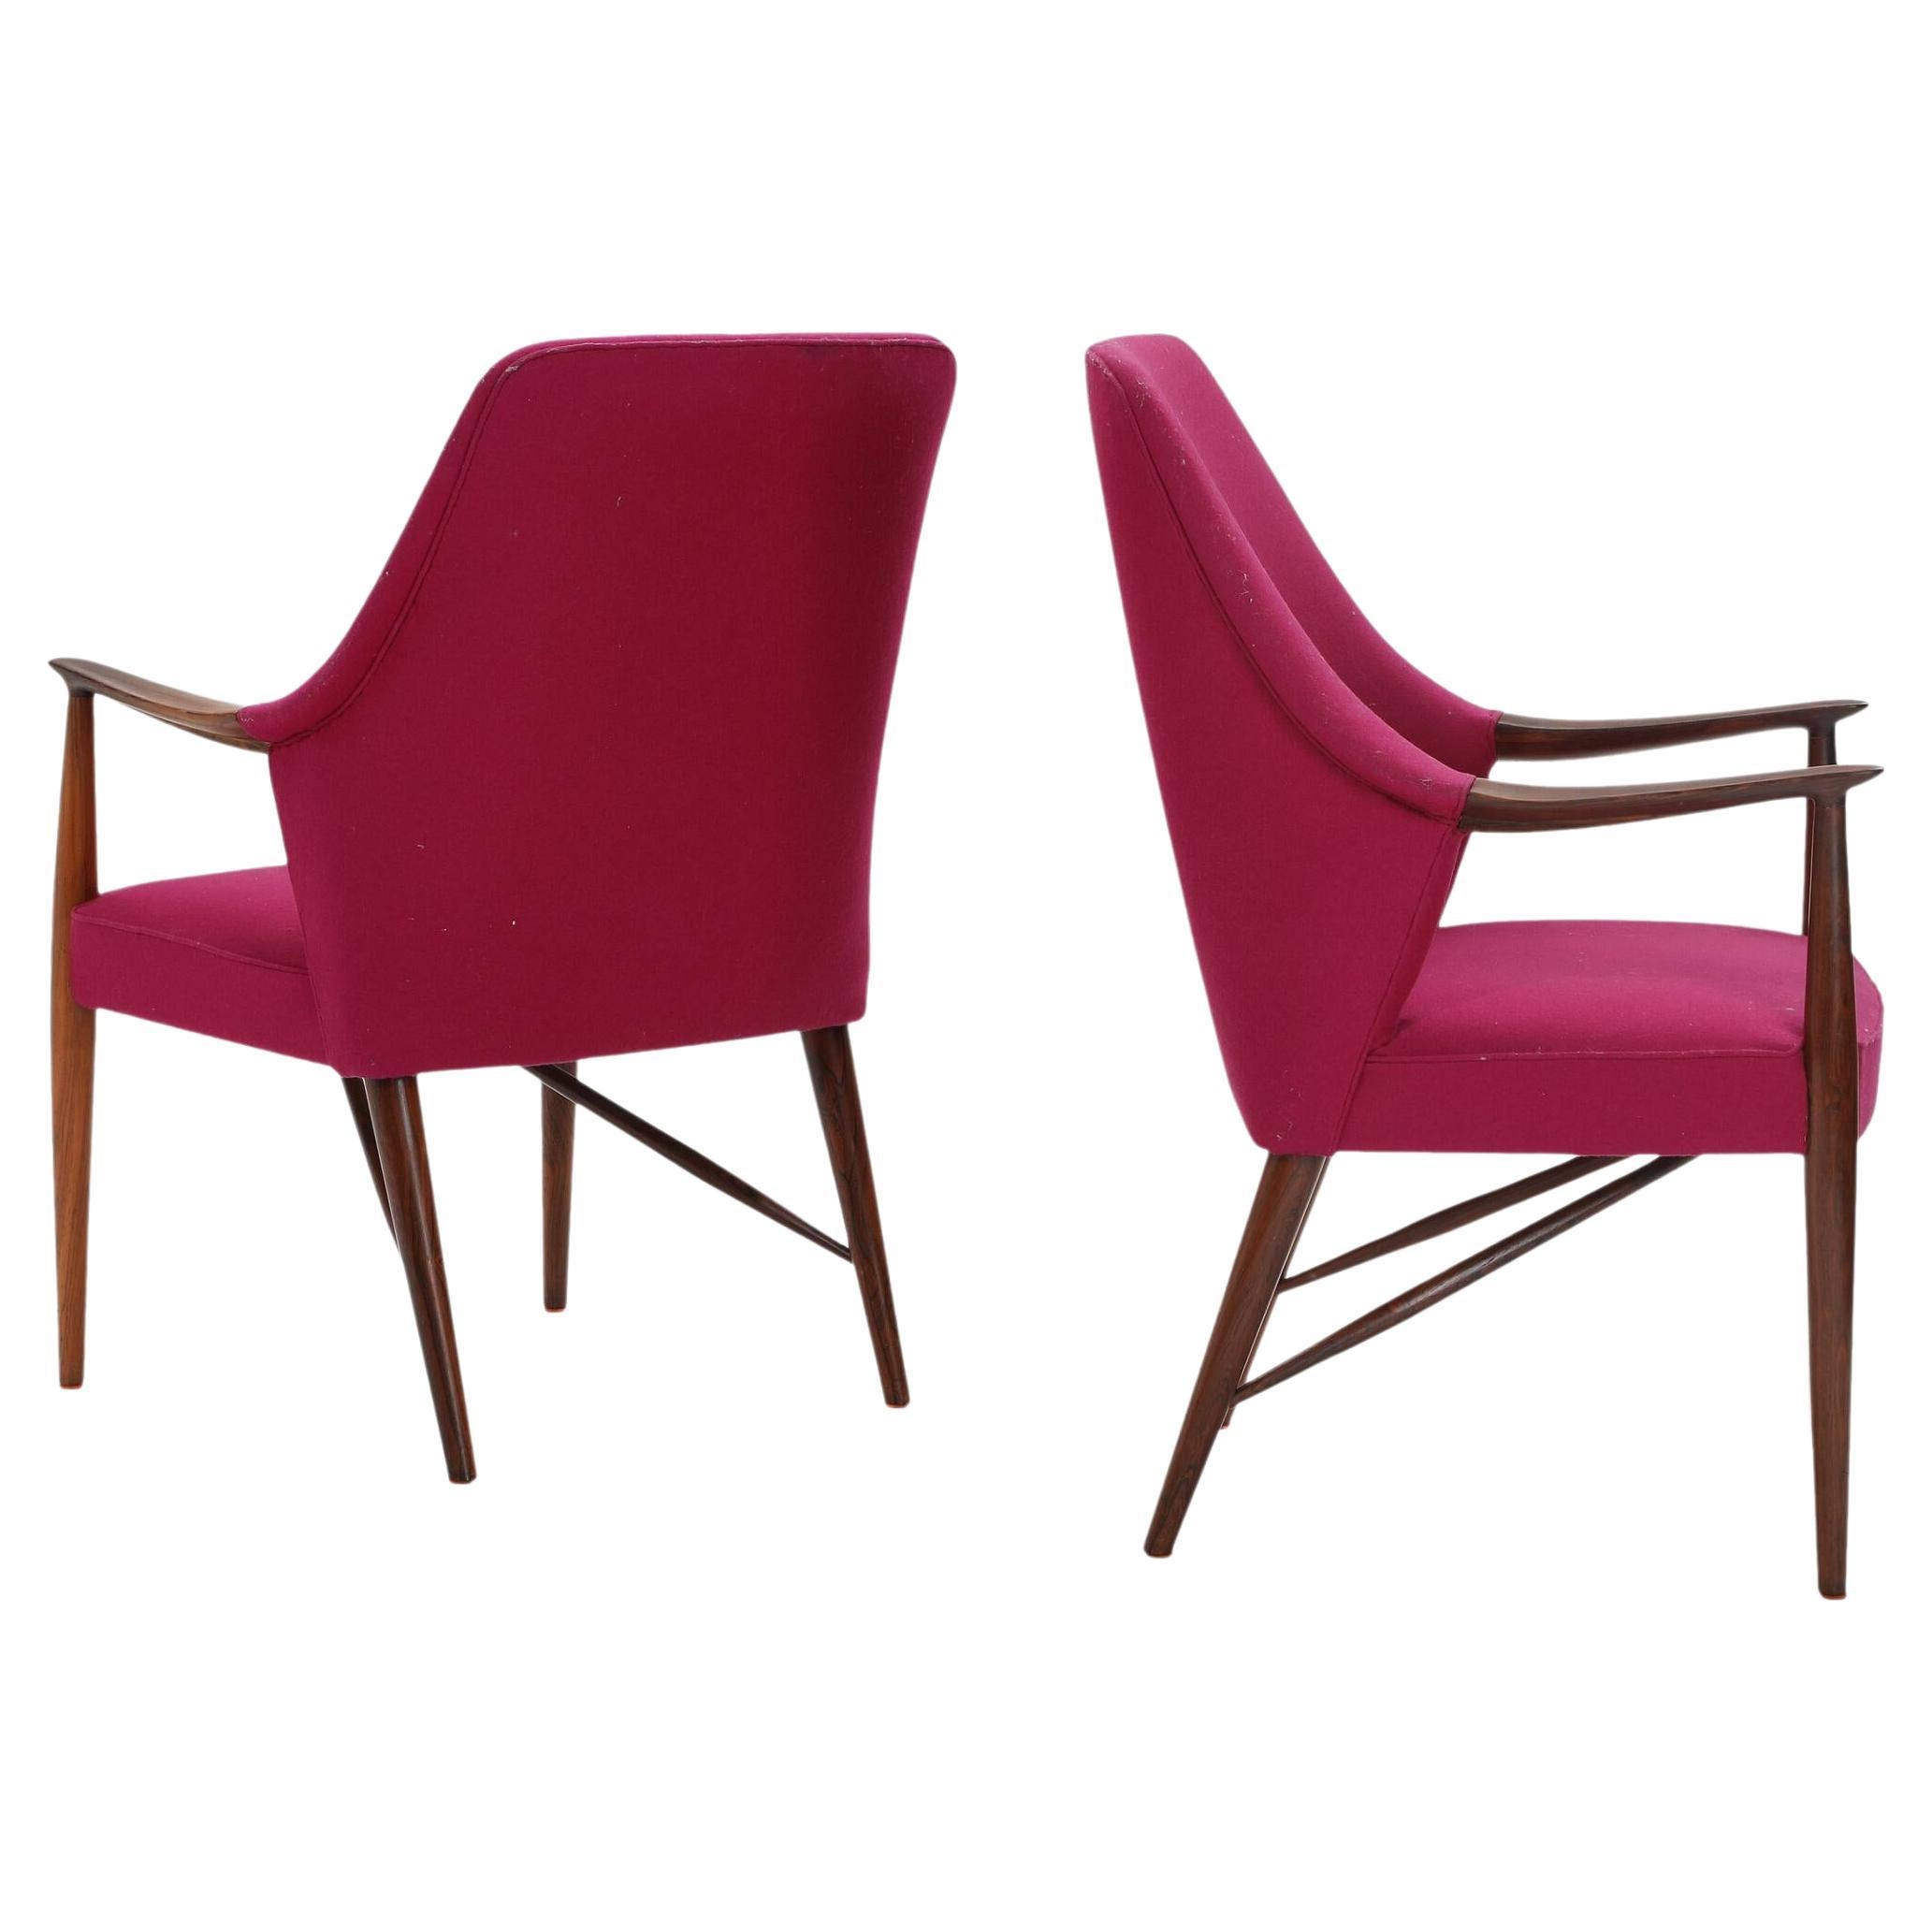 Danish Easy Chair in Rosewood by Hvidt & Mølgaard 1940s Set of 2 For Sale